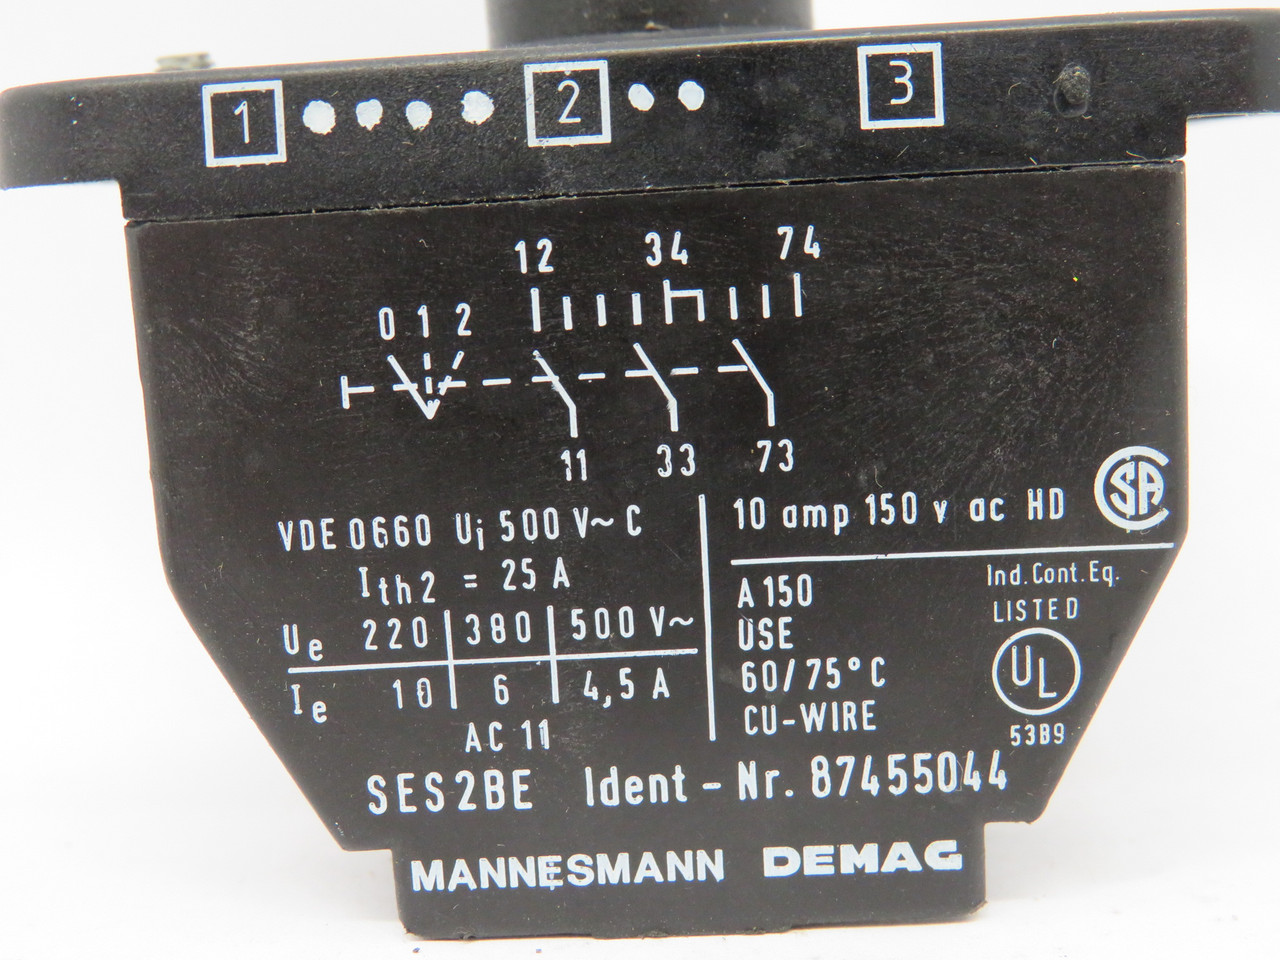 Mannesmann Demag 87455044 SES2BE Contact Block 10A@150VAC *COS DMG* USED